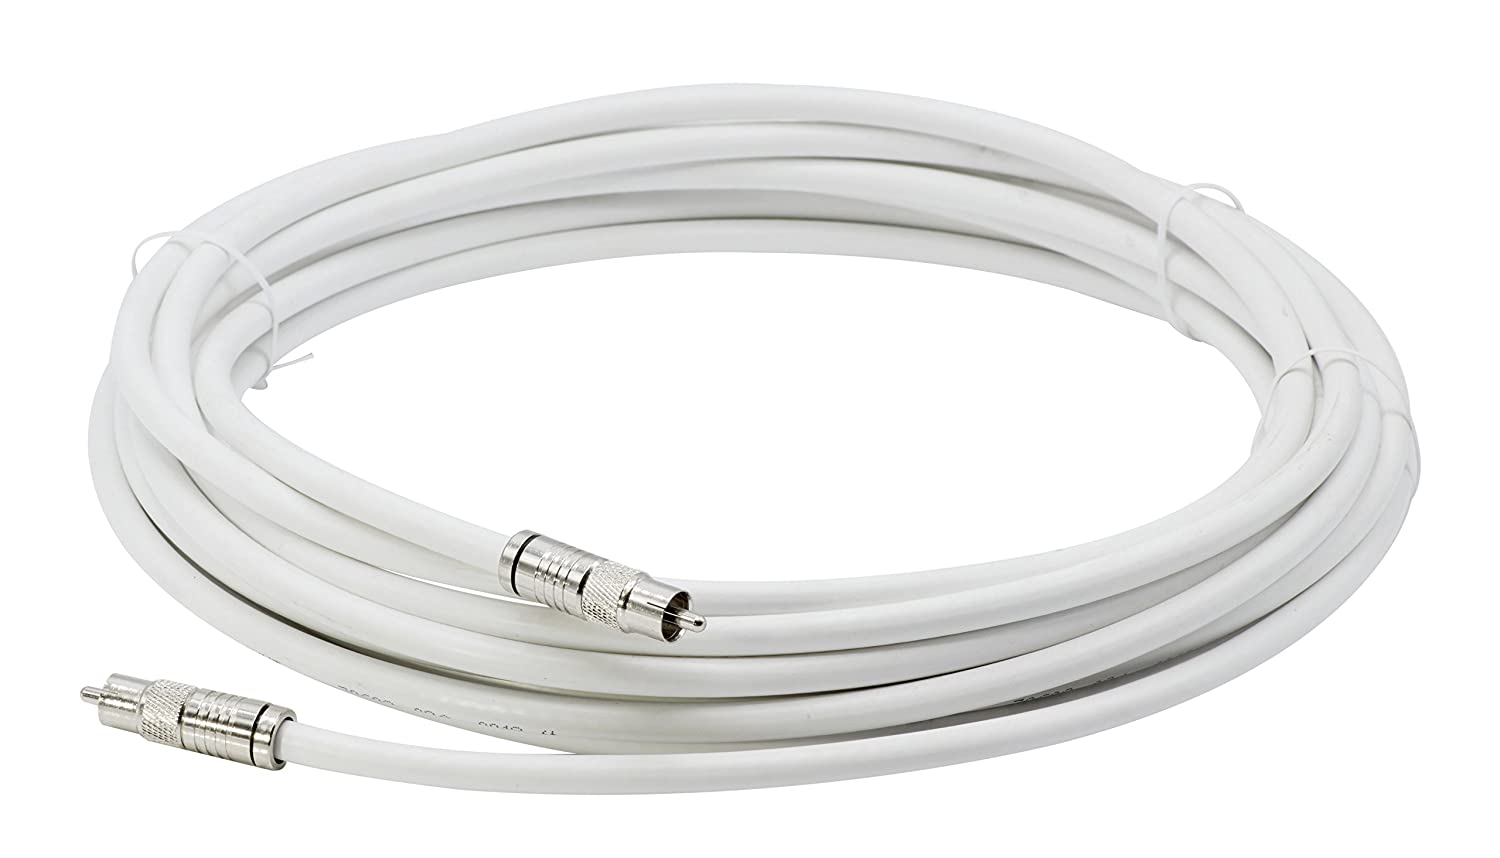 digital audio cable : digital coaxial cable with rca connections, 75 ohm  coax, proudly made in the usa : subwoofer cable  (s/pdif) white rca cable, 6 feet - image 1 of 6